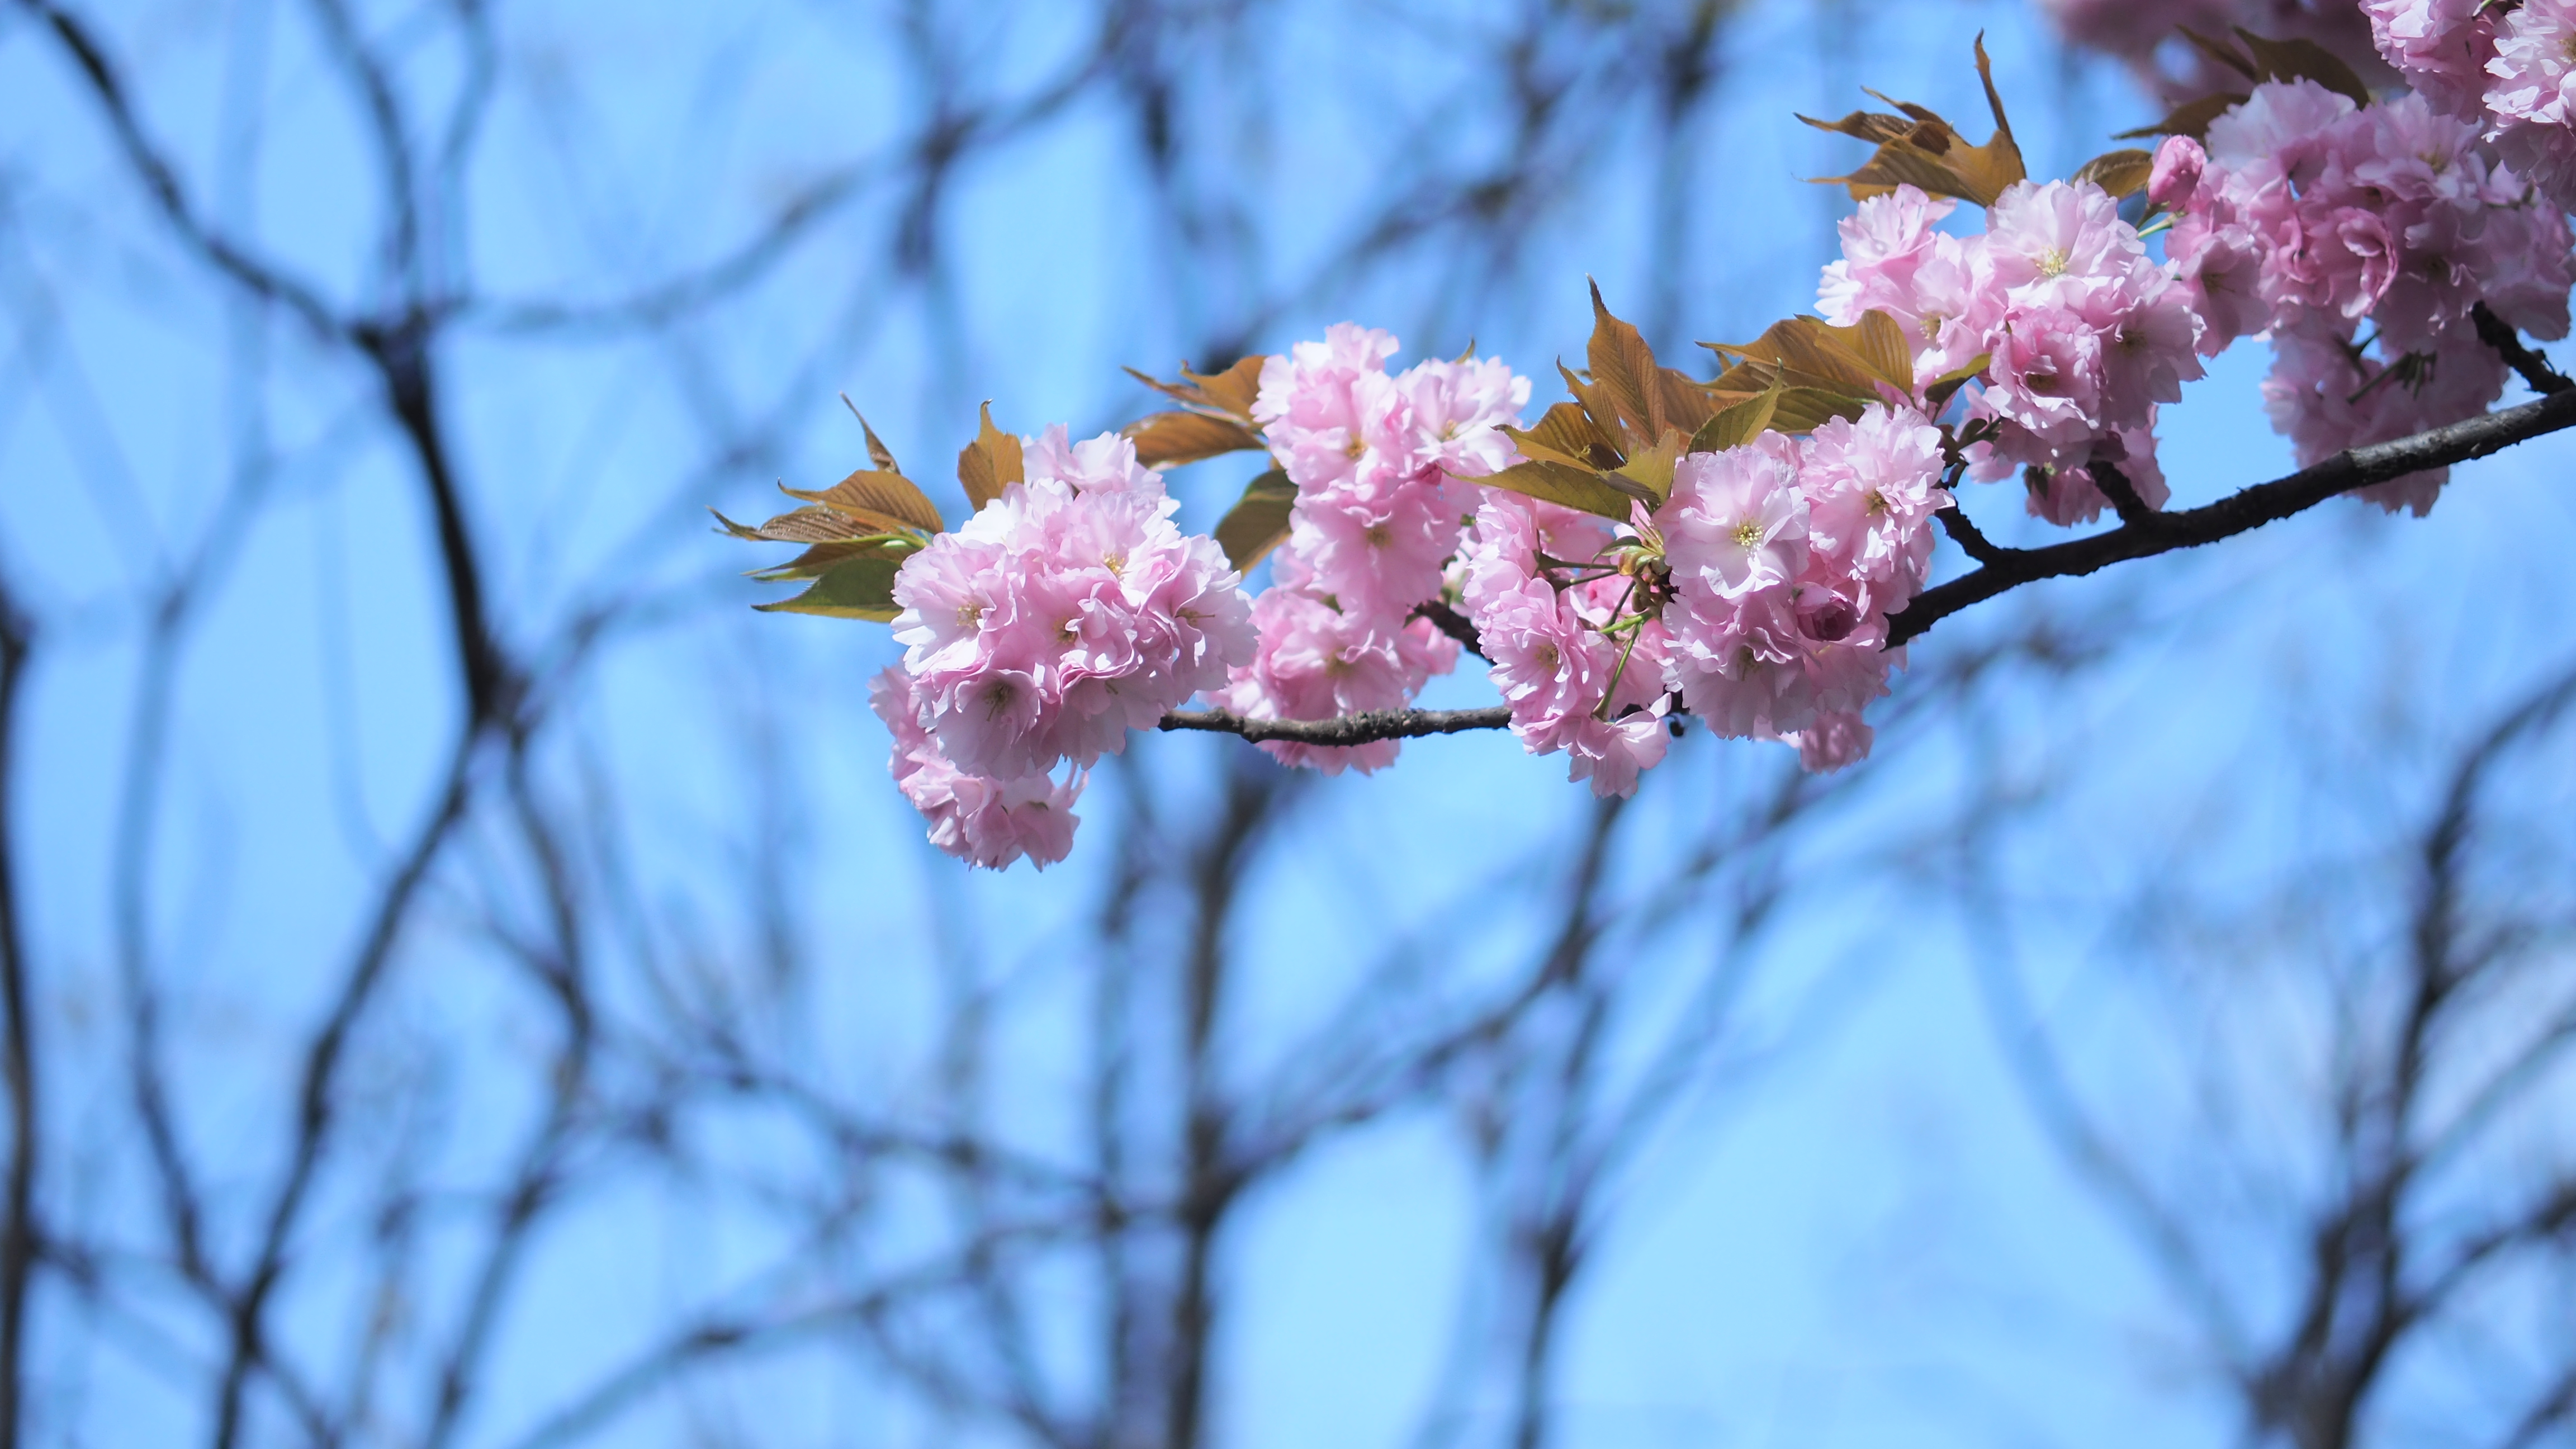 General 4608x2592 cherry blossom spring spring flower flowers nature trees branch plants outdoors closeup